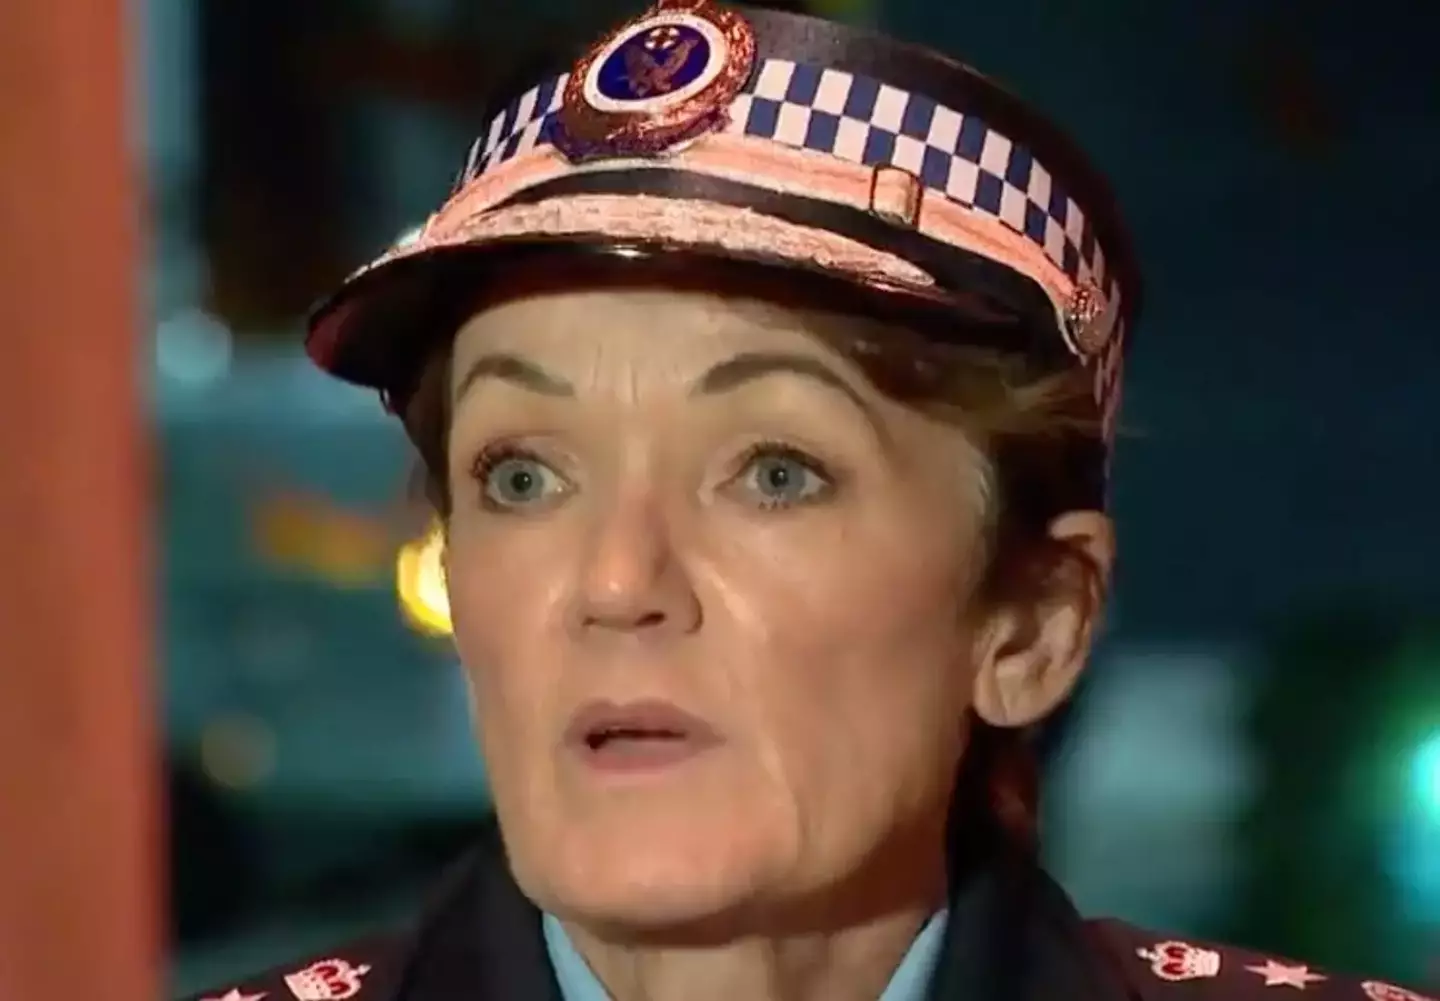 NSW Police Commissioner Karen Webb confirmed a police officer has been charged with GBH.